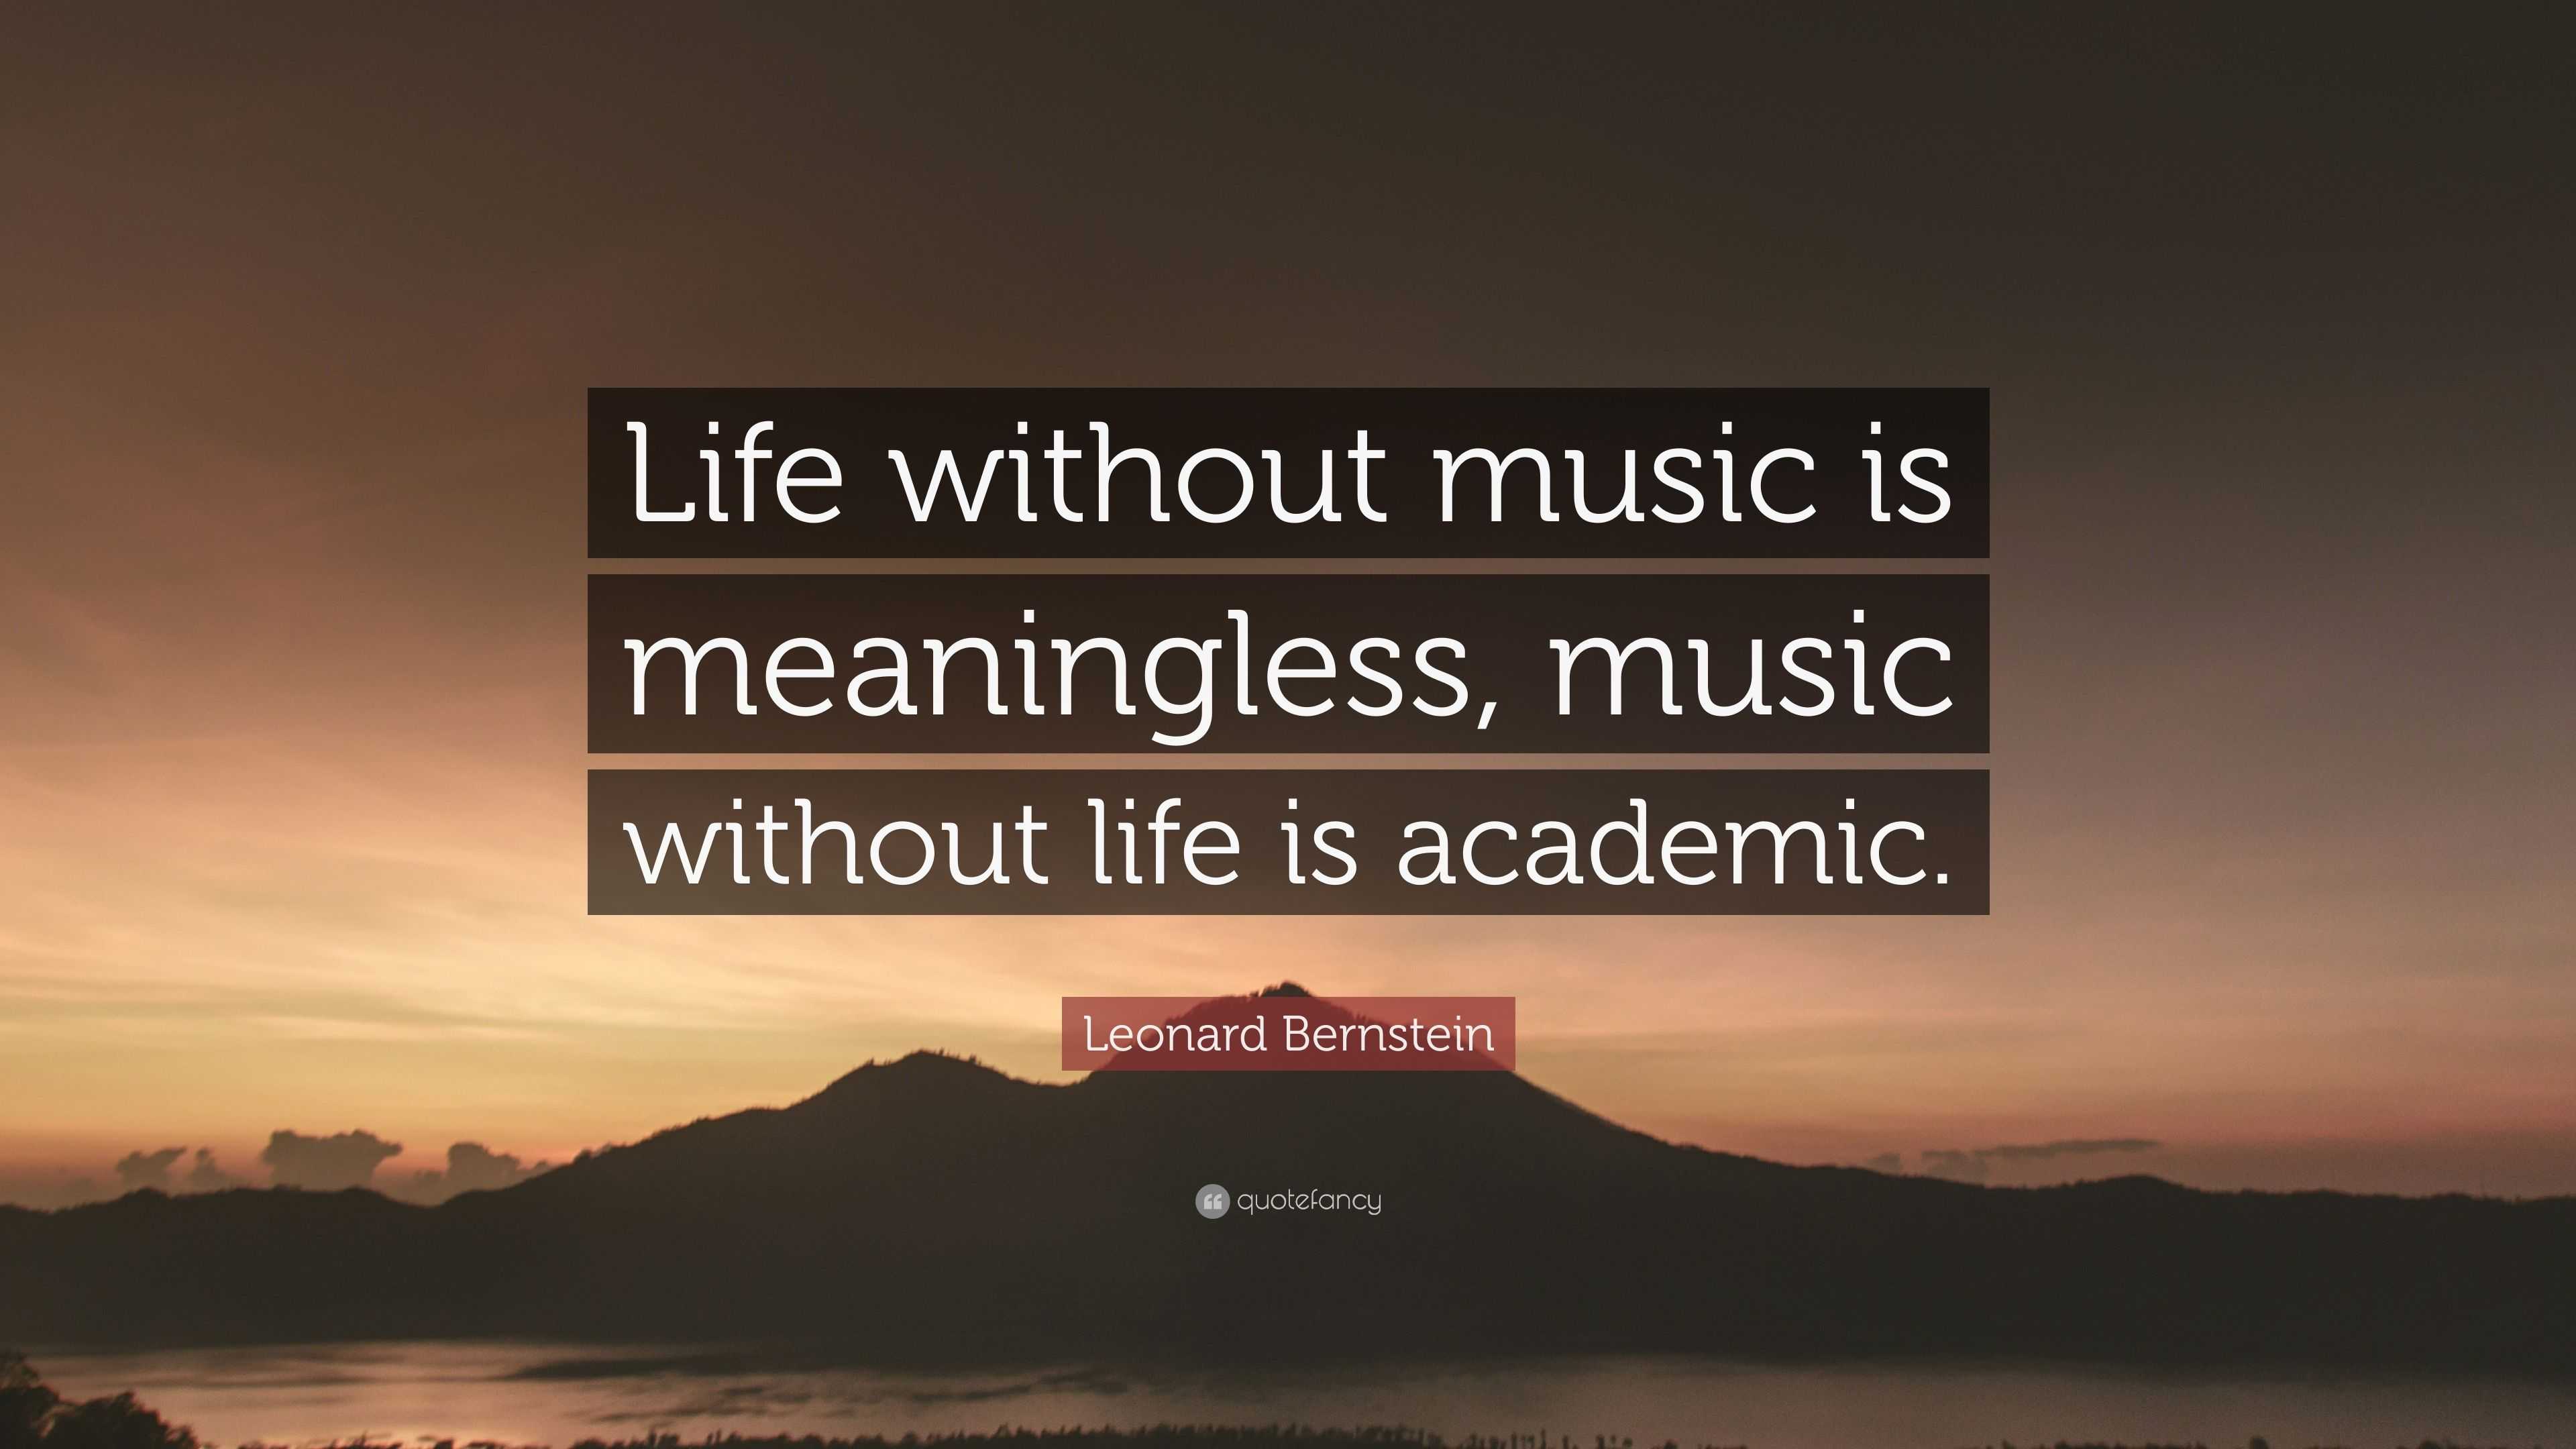 Leonard Bernstein Quote: “Life without music is meaningless, music